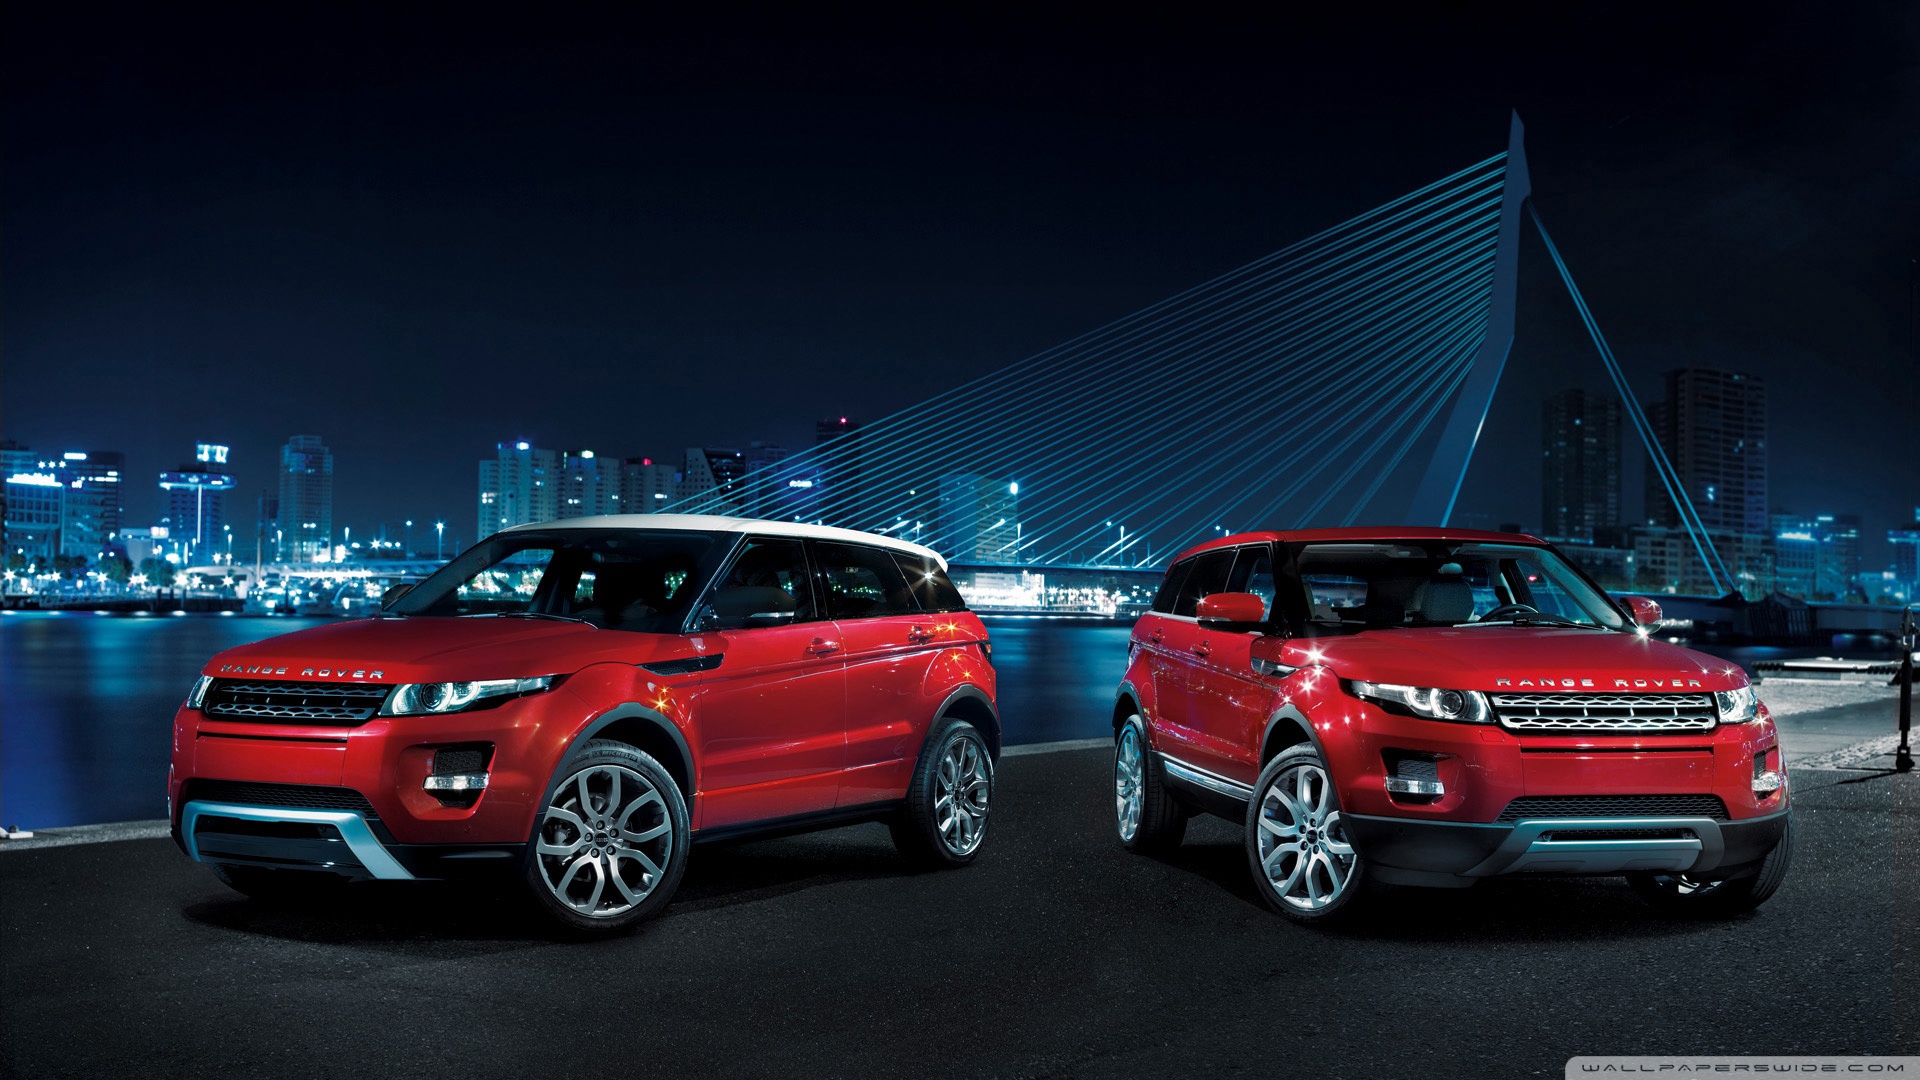 Showing Gallery For Red Range Rover Evoque Wallpaper